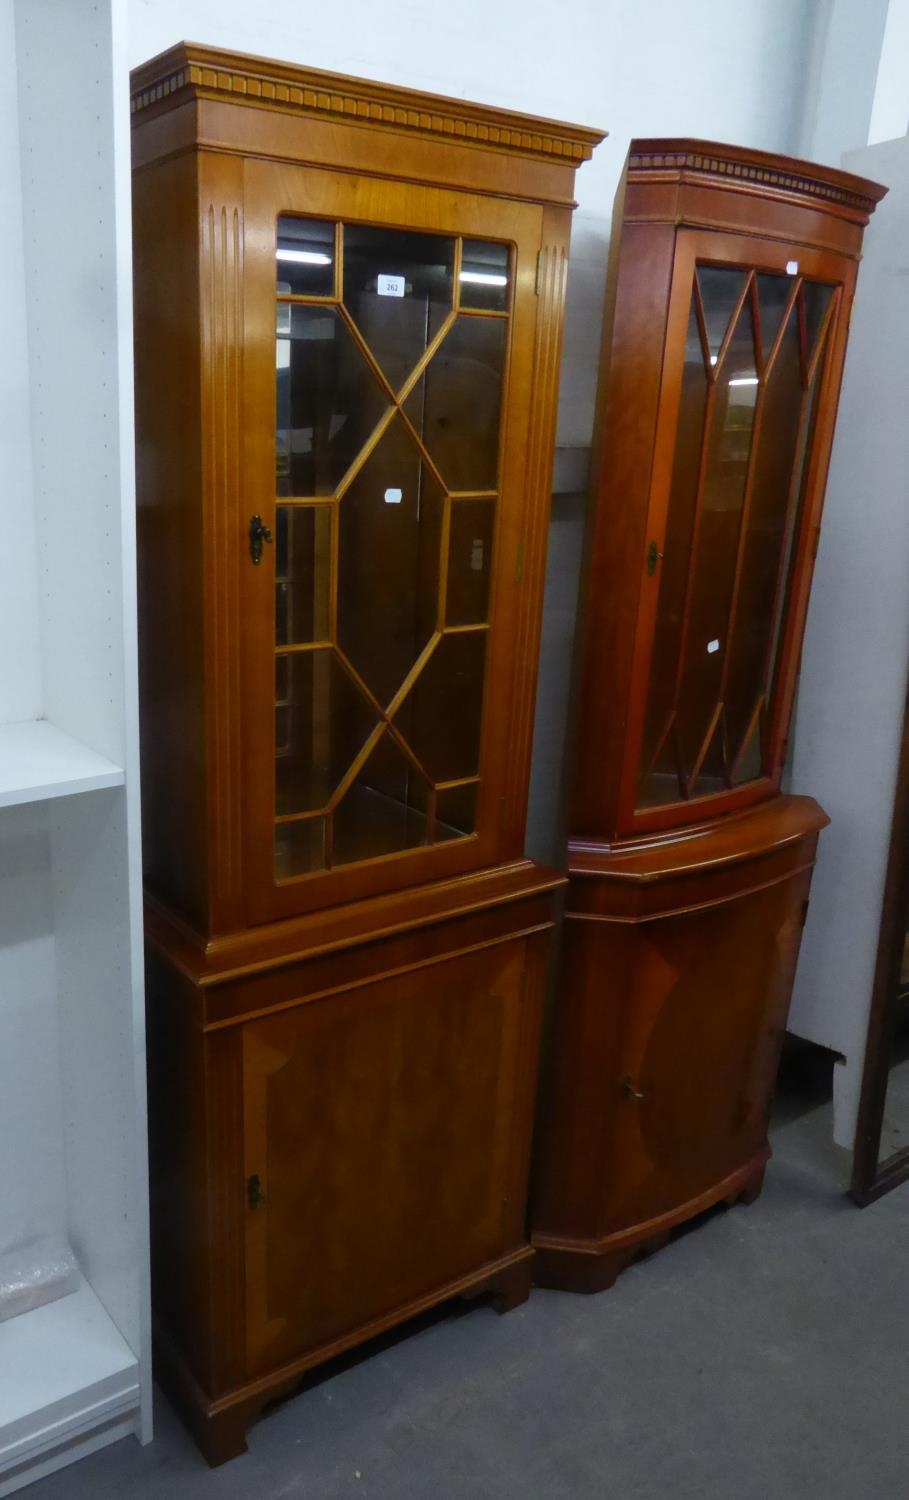 A YEW-WOOD TALL NARROW DISPLAY CABINET, THE UPPER SECTION HAVING ASTRAGAL GLAZED DOOR, ABOVE A PANEL